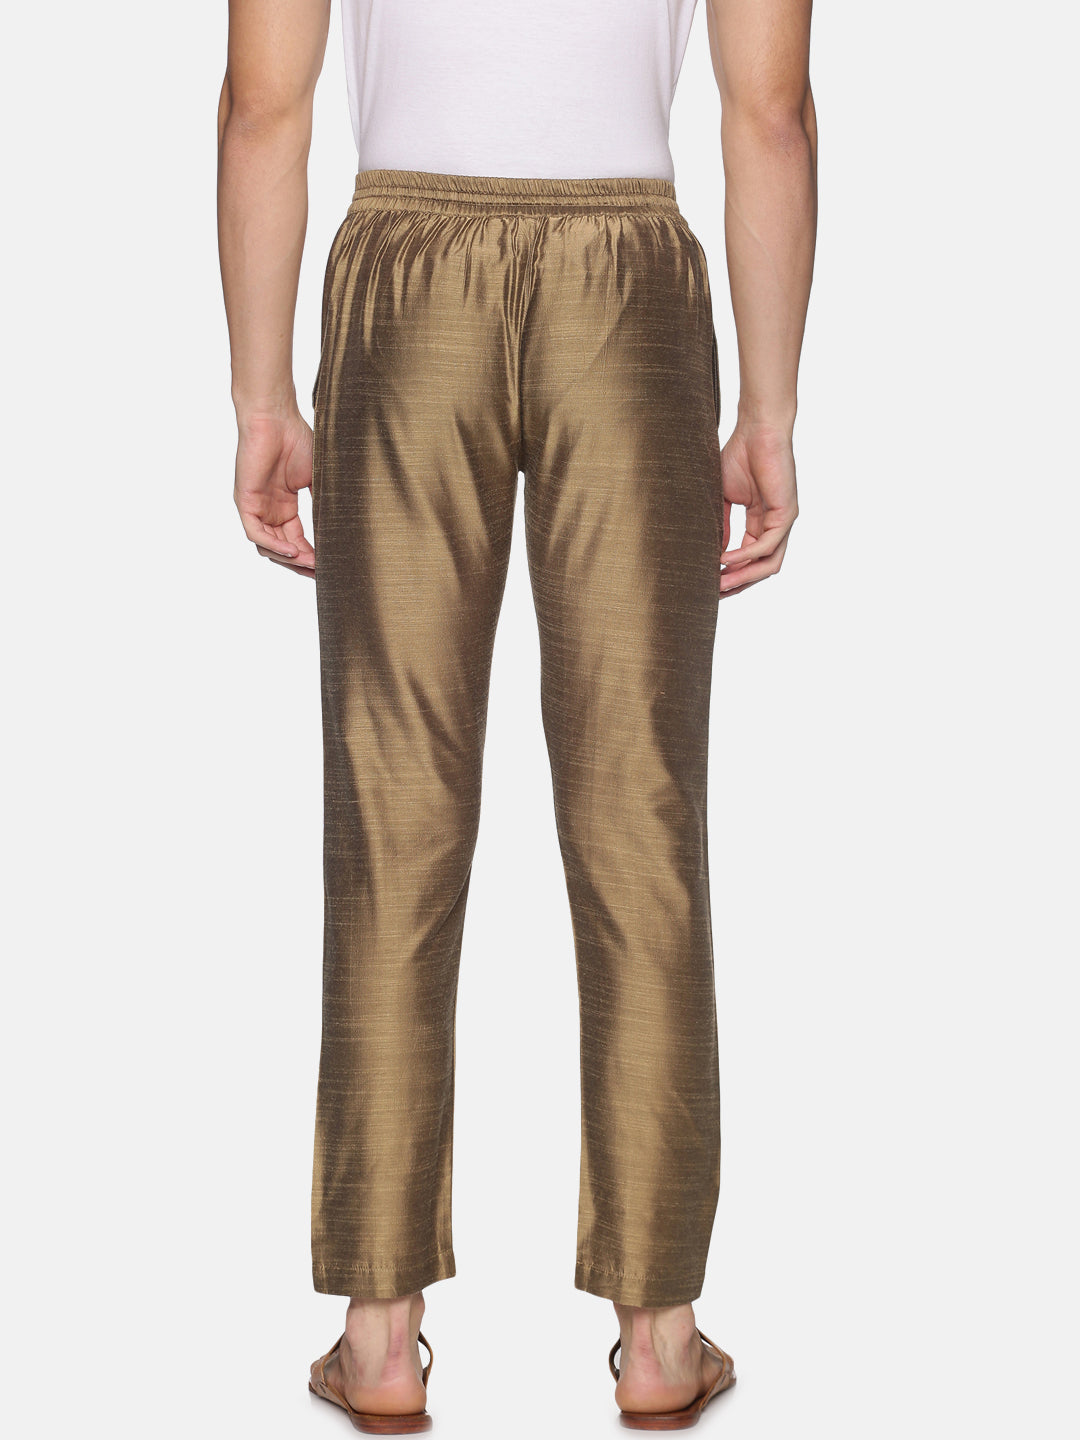 Pack of 2 Gold & Black Art Silk Trousers with Drawstring